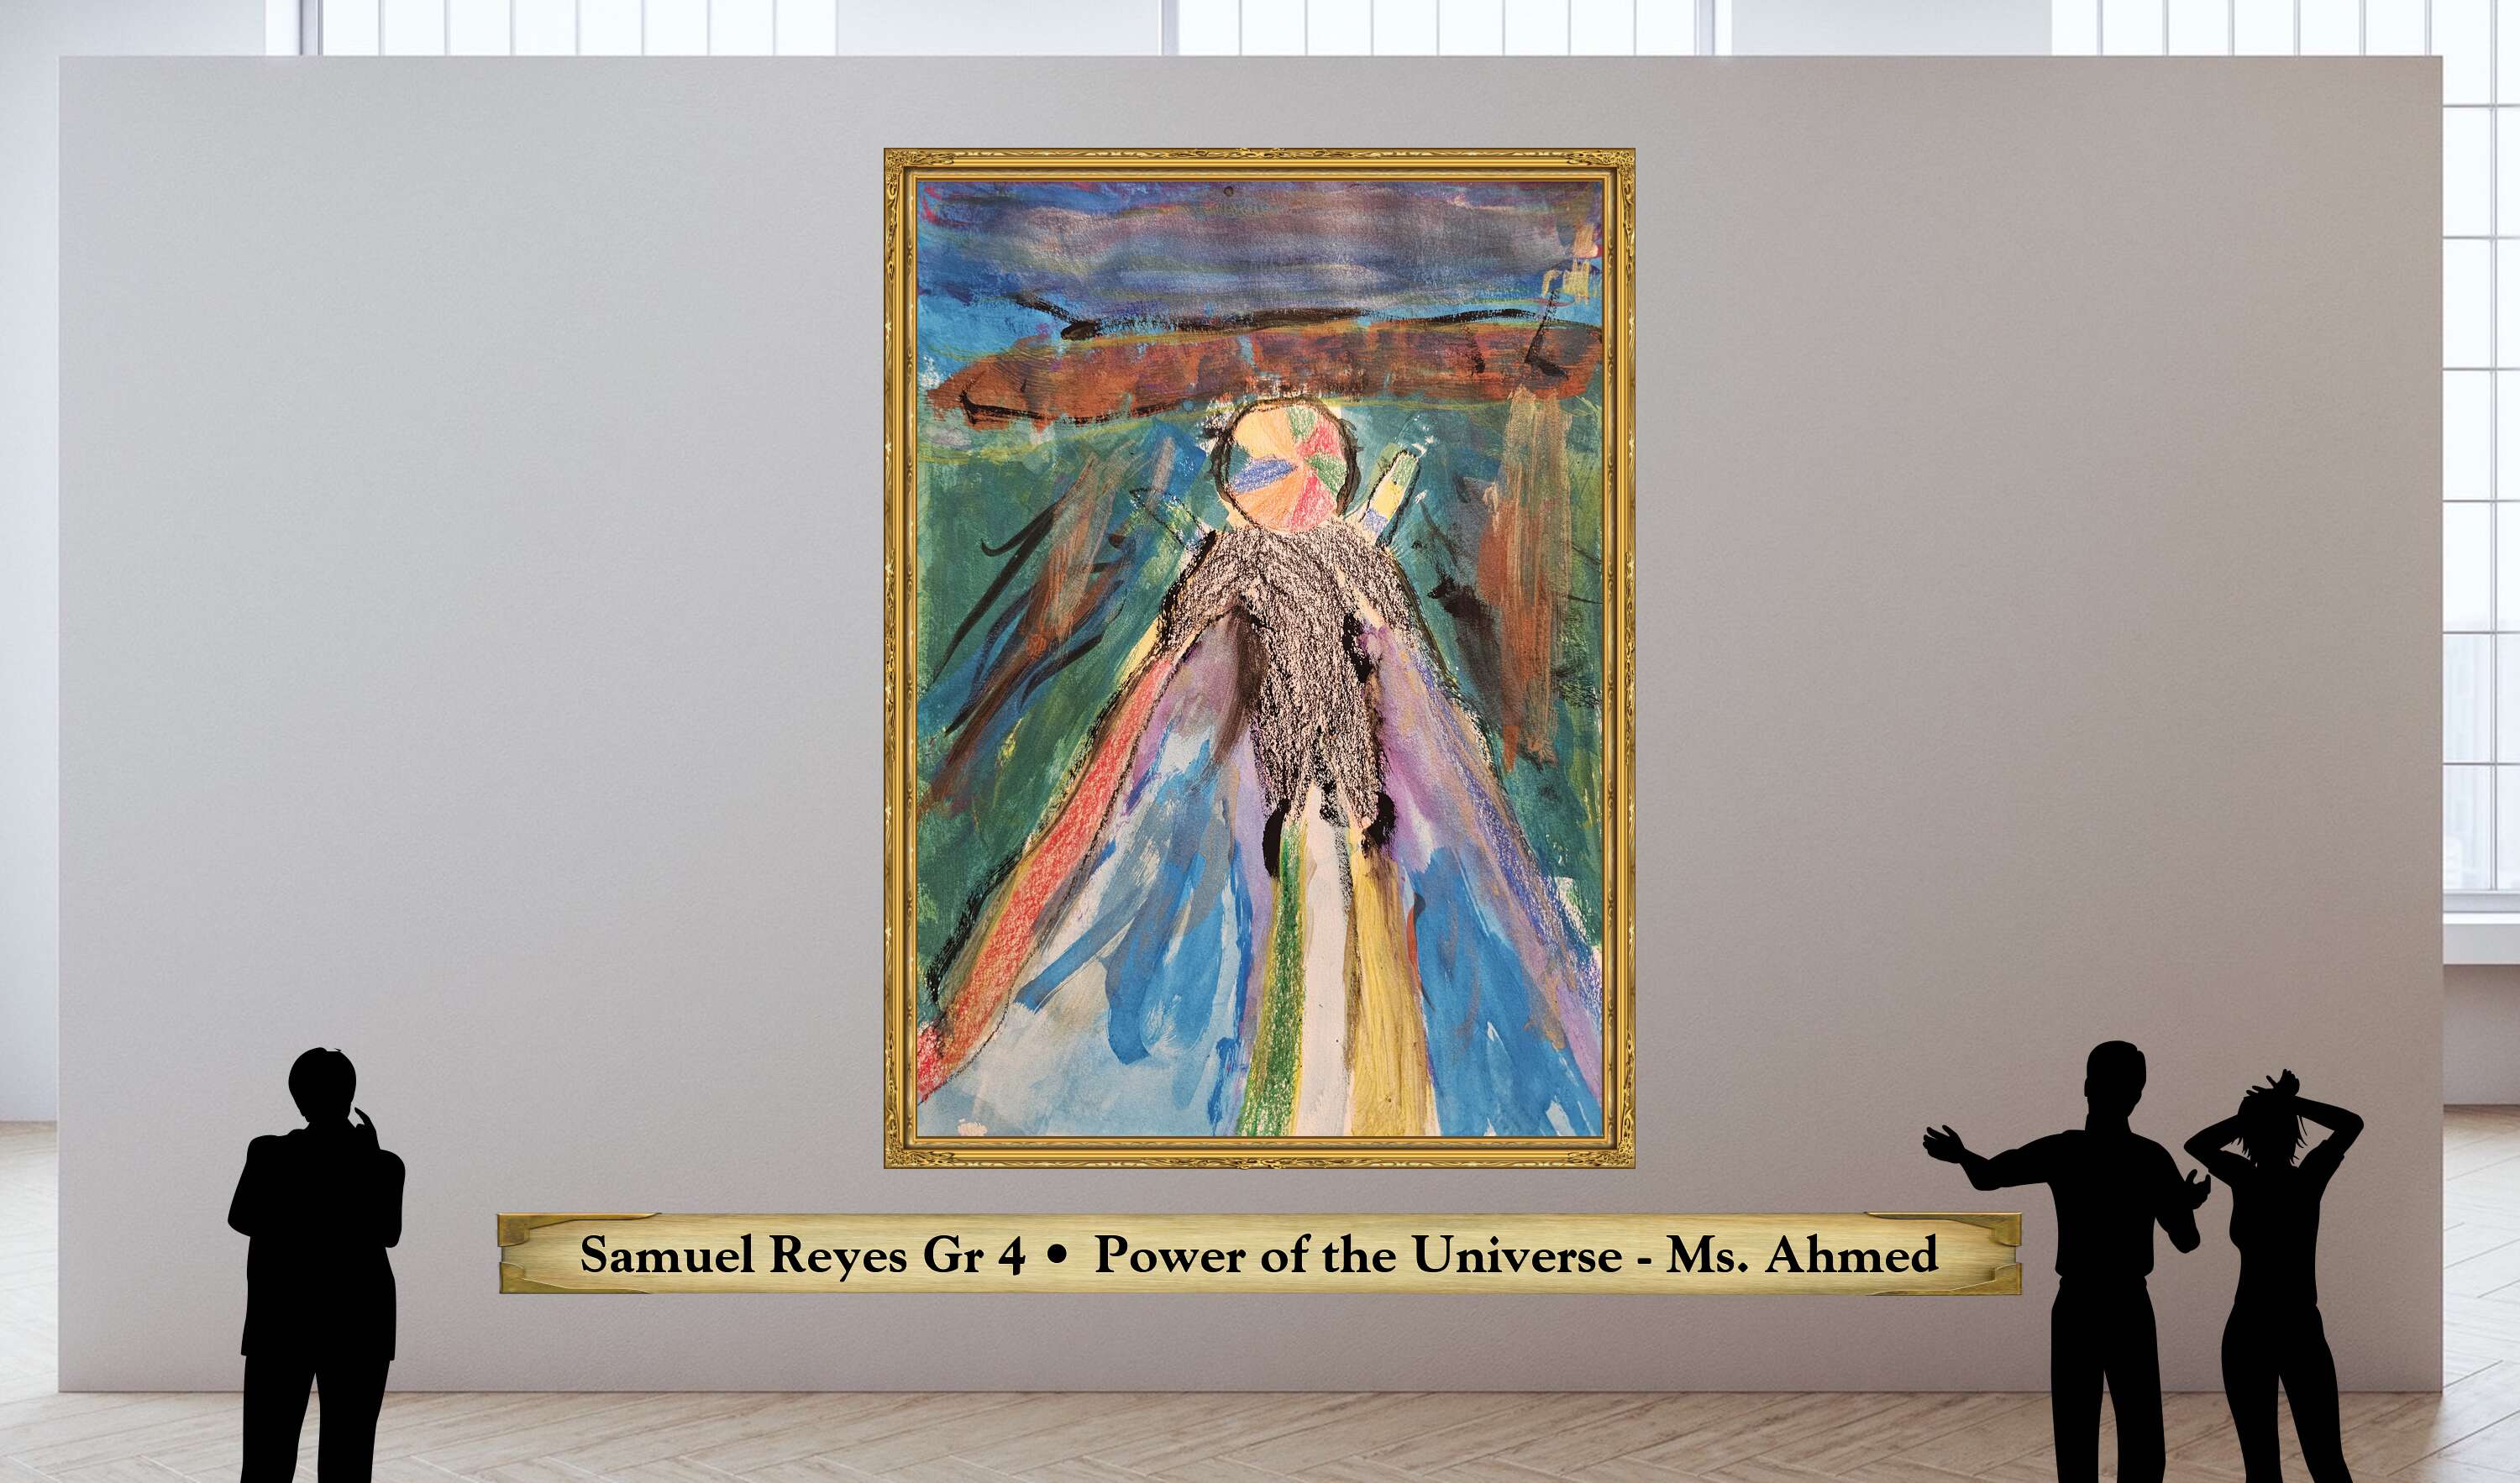 Samuel Reyes Gr 4 • Power of the Universe - Ms. Ahmed